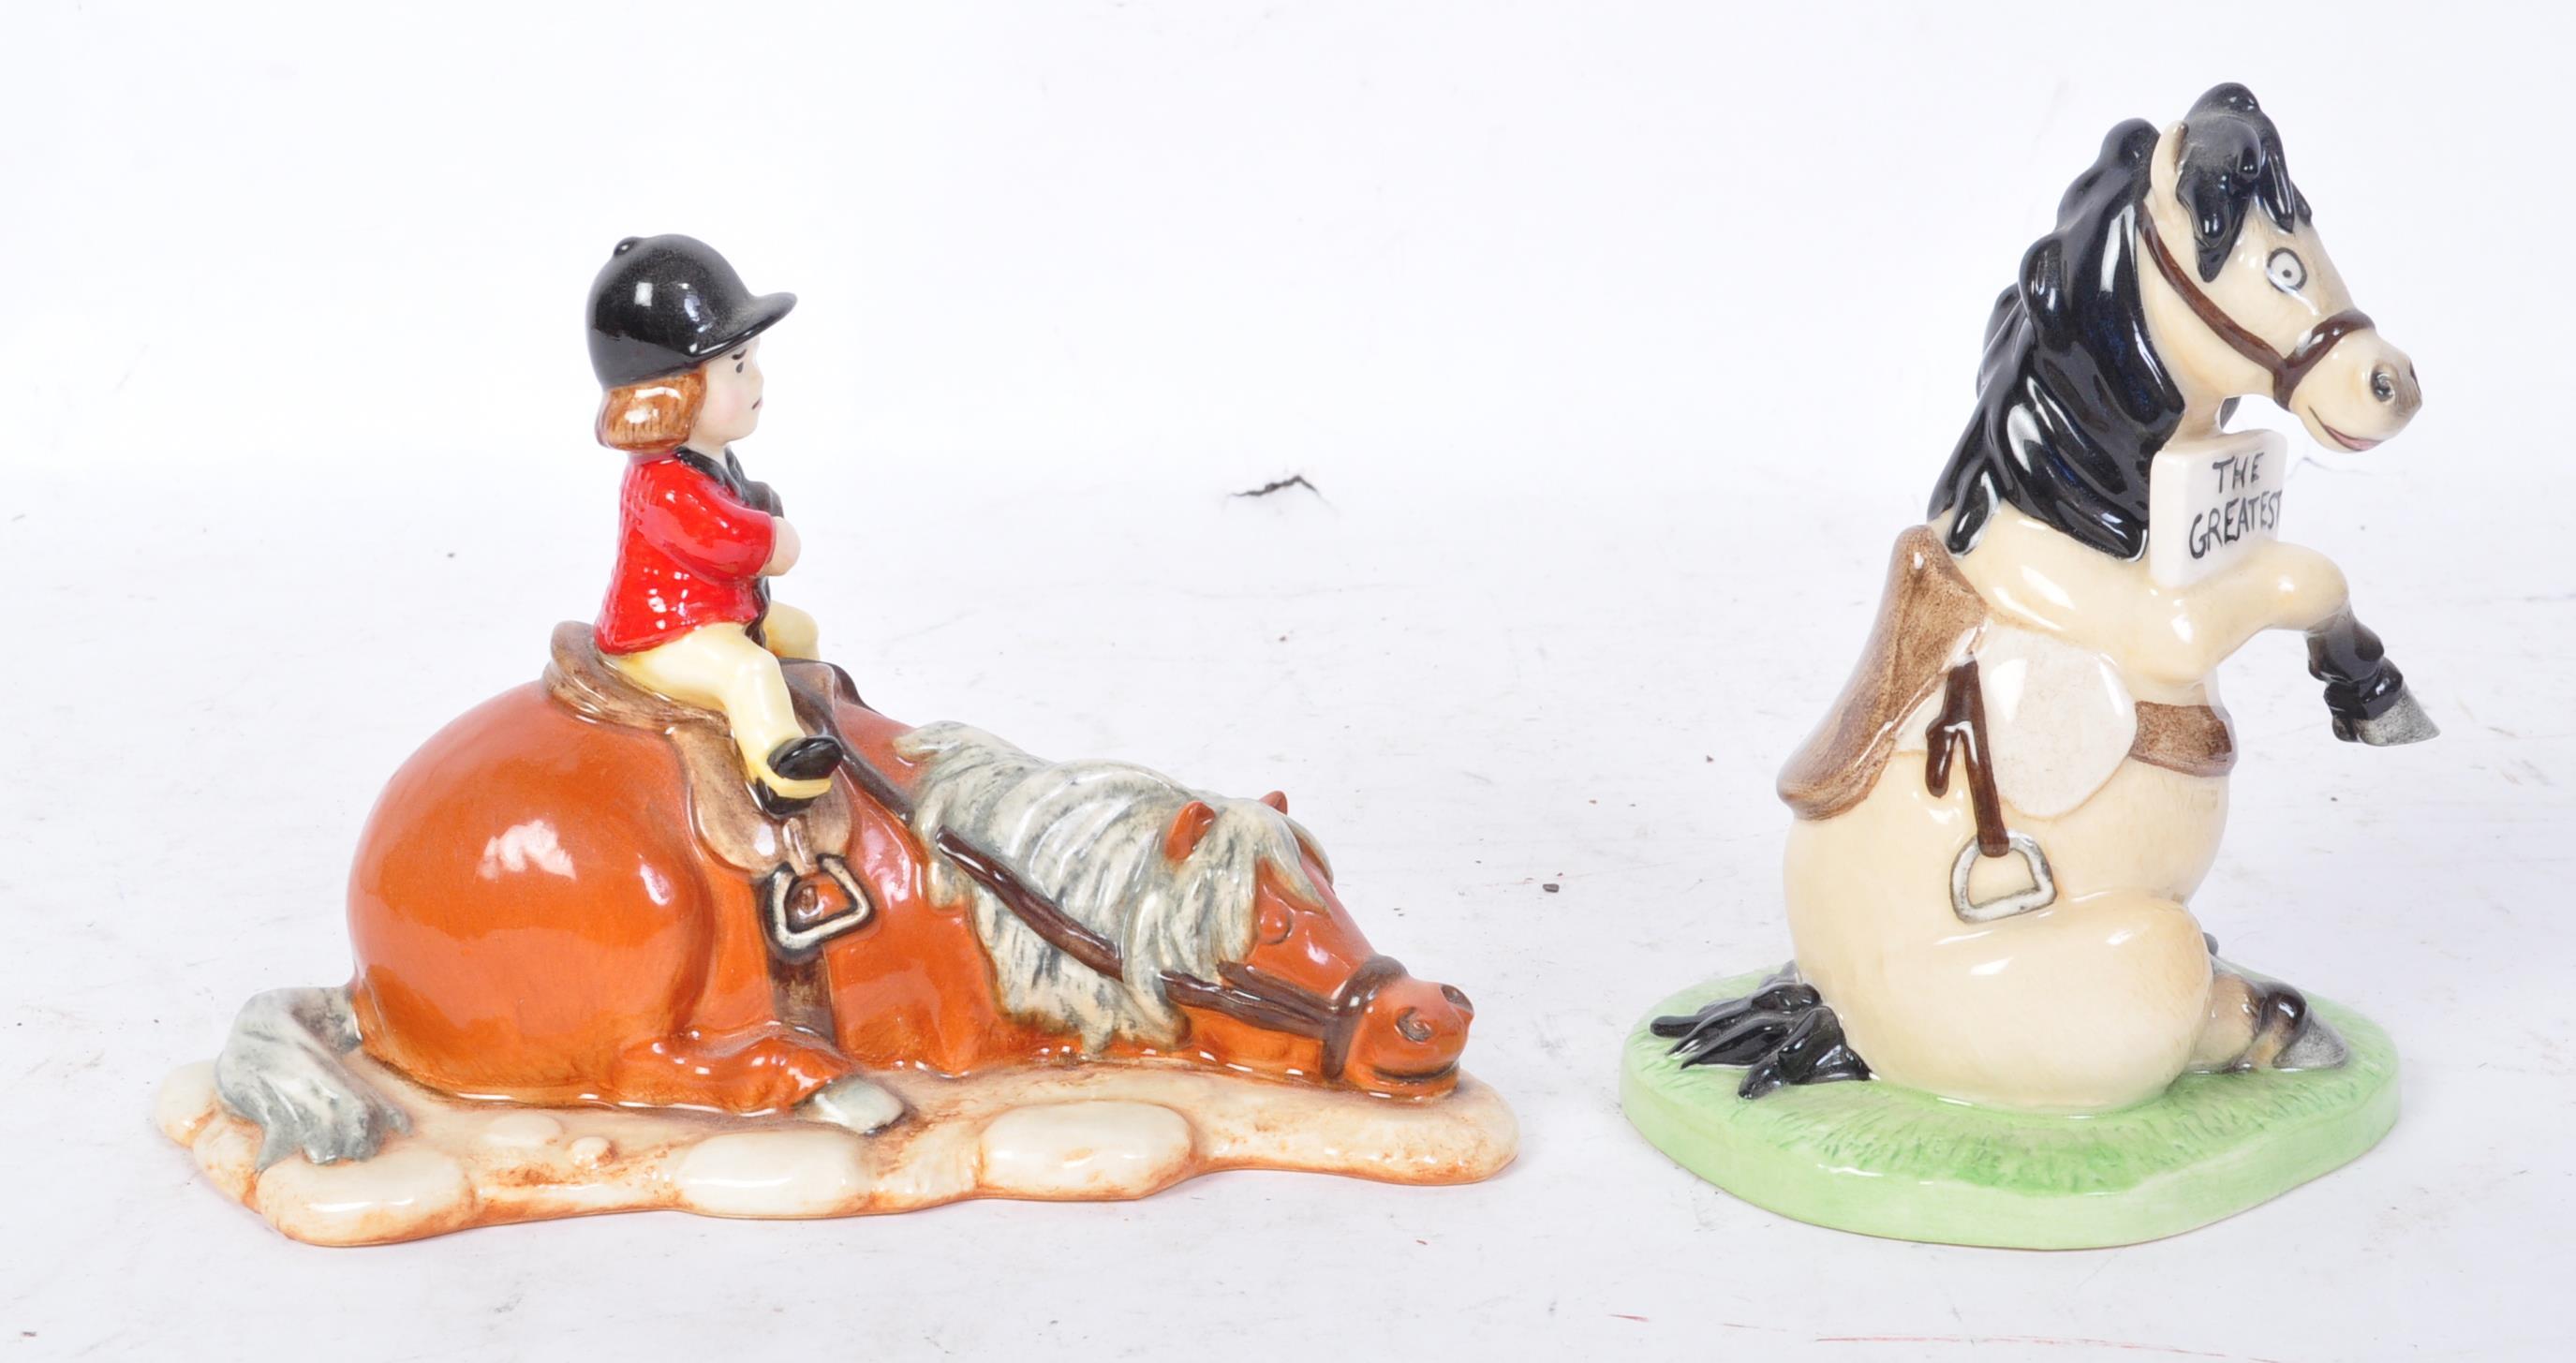 TWO ROYAL DOULTON NORMAN THELWELL HORSE FIGURES - Image 2 of 5